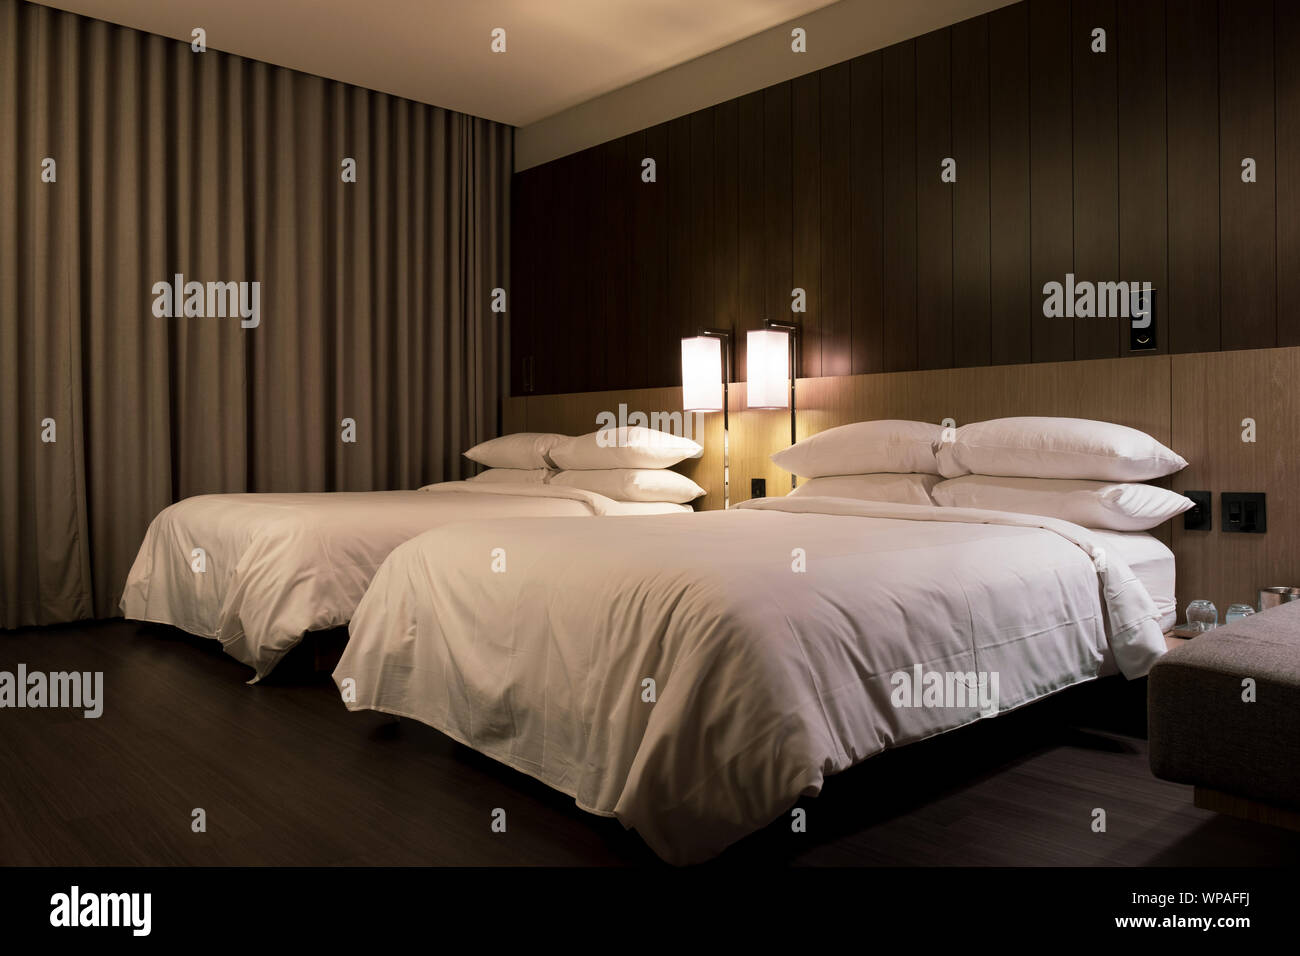 Standard double beds hotel room Stock Photo